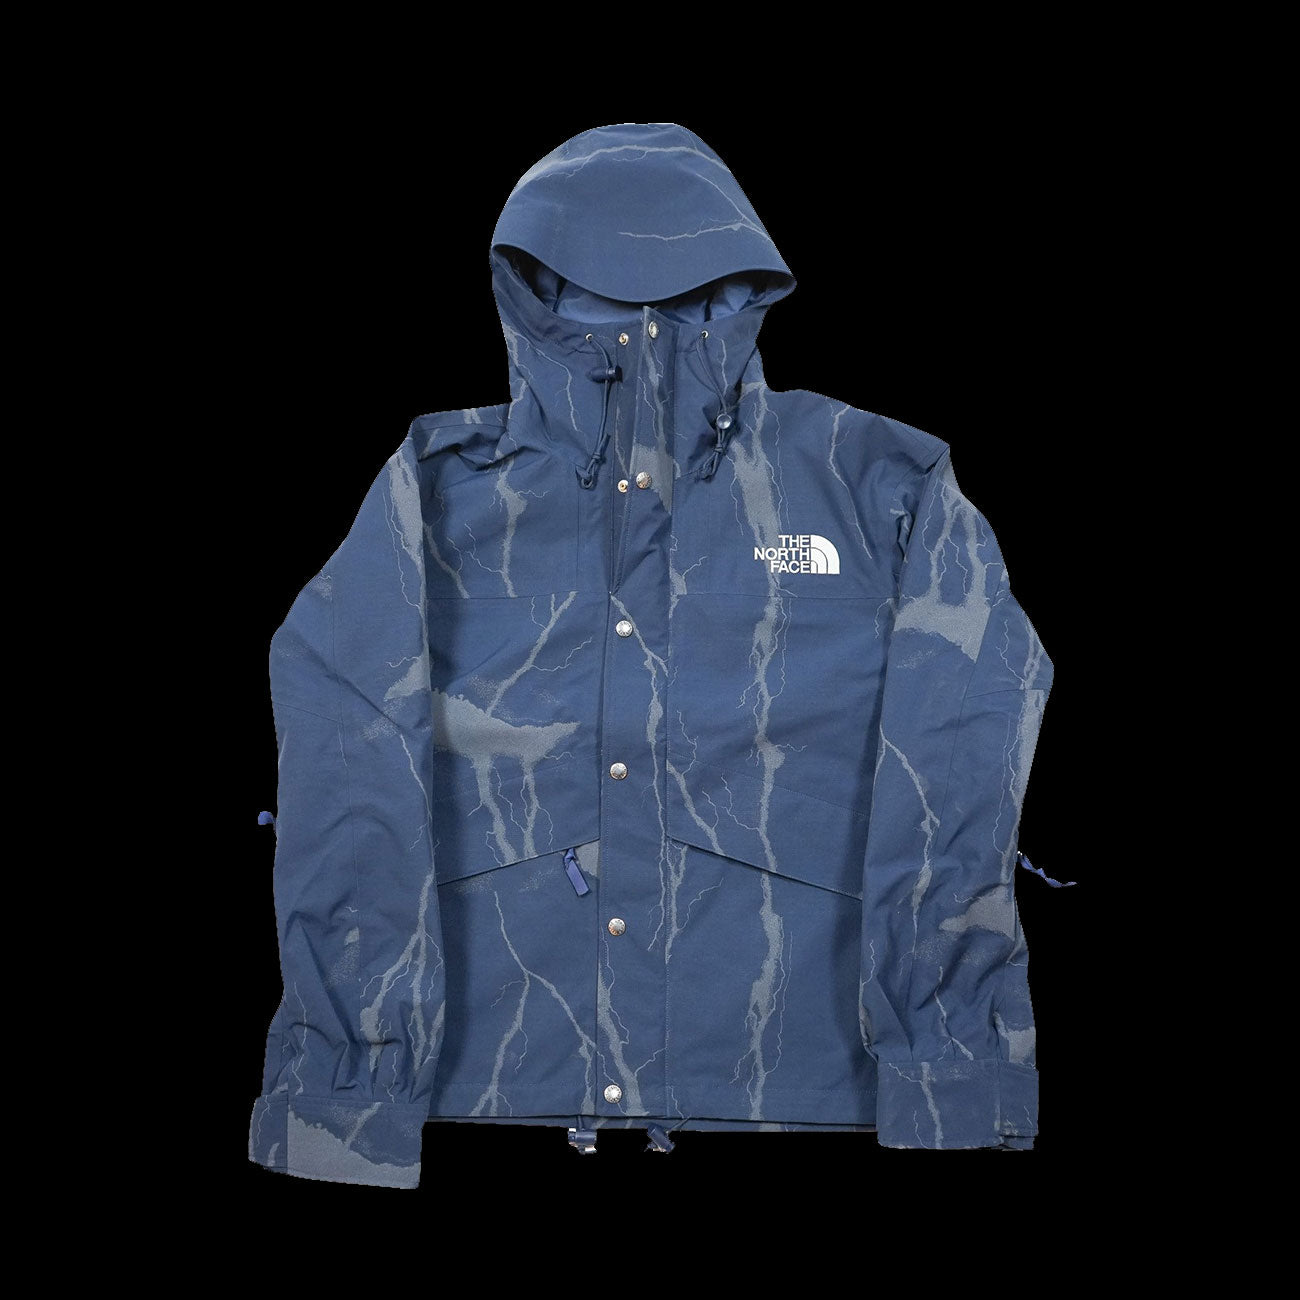 The North Face Clothes – Two 18